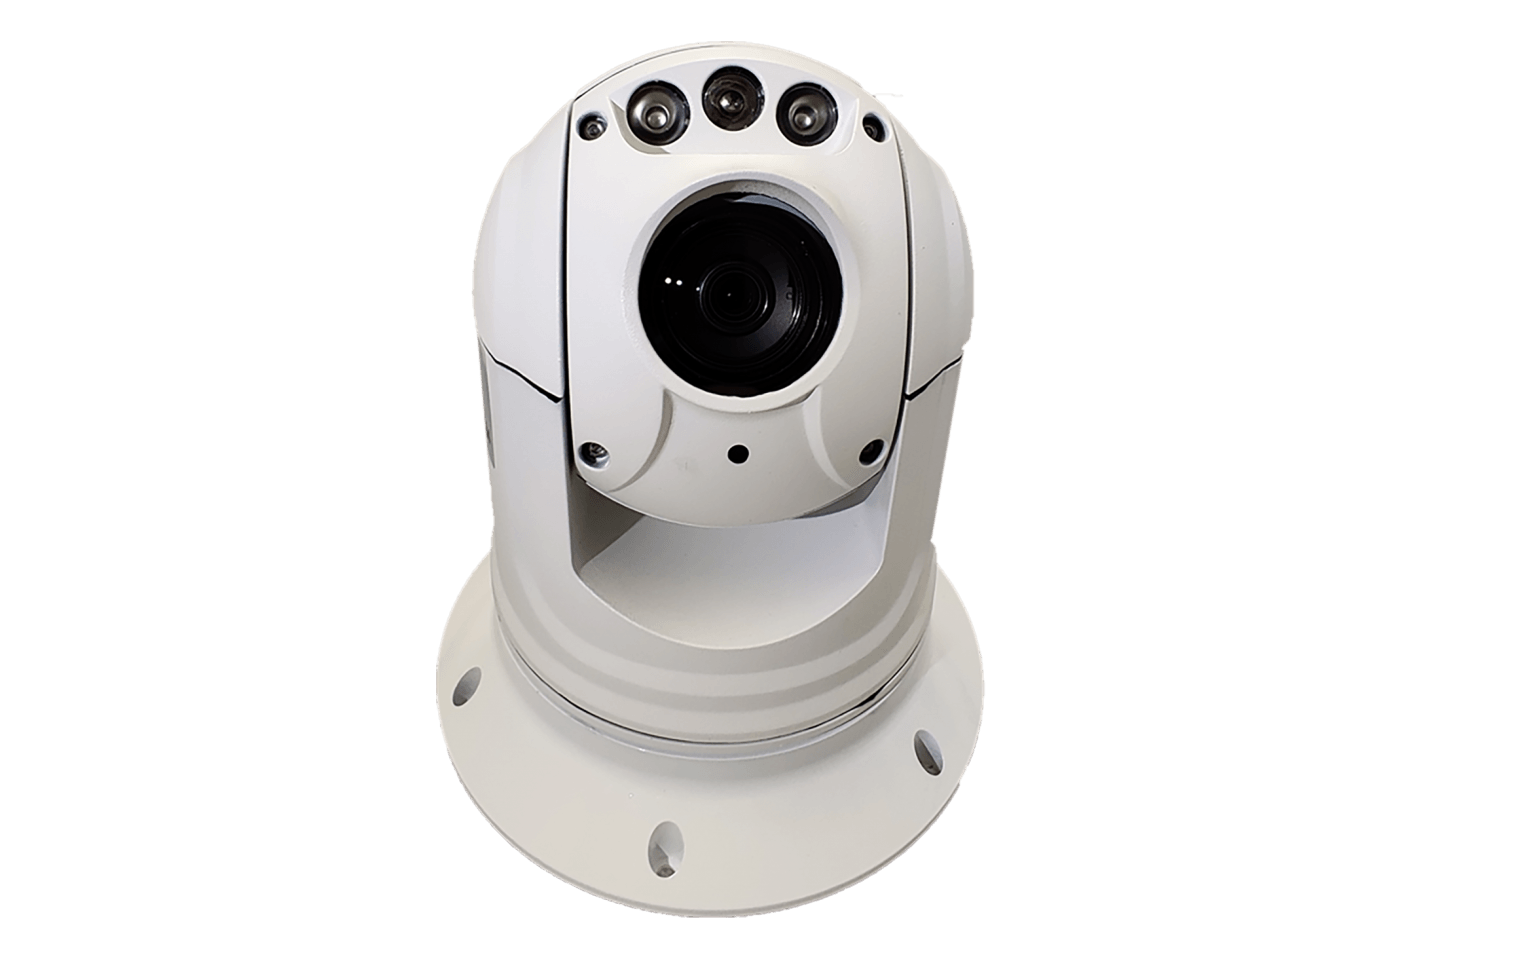 Long range flir camera system for ISR, security and surveillance applications